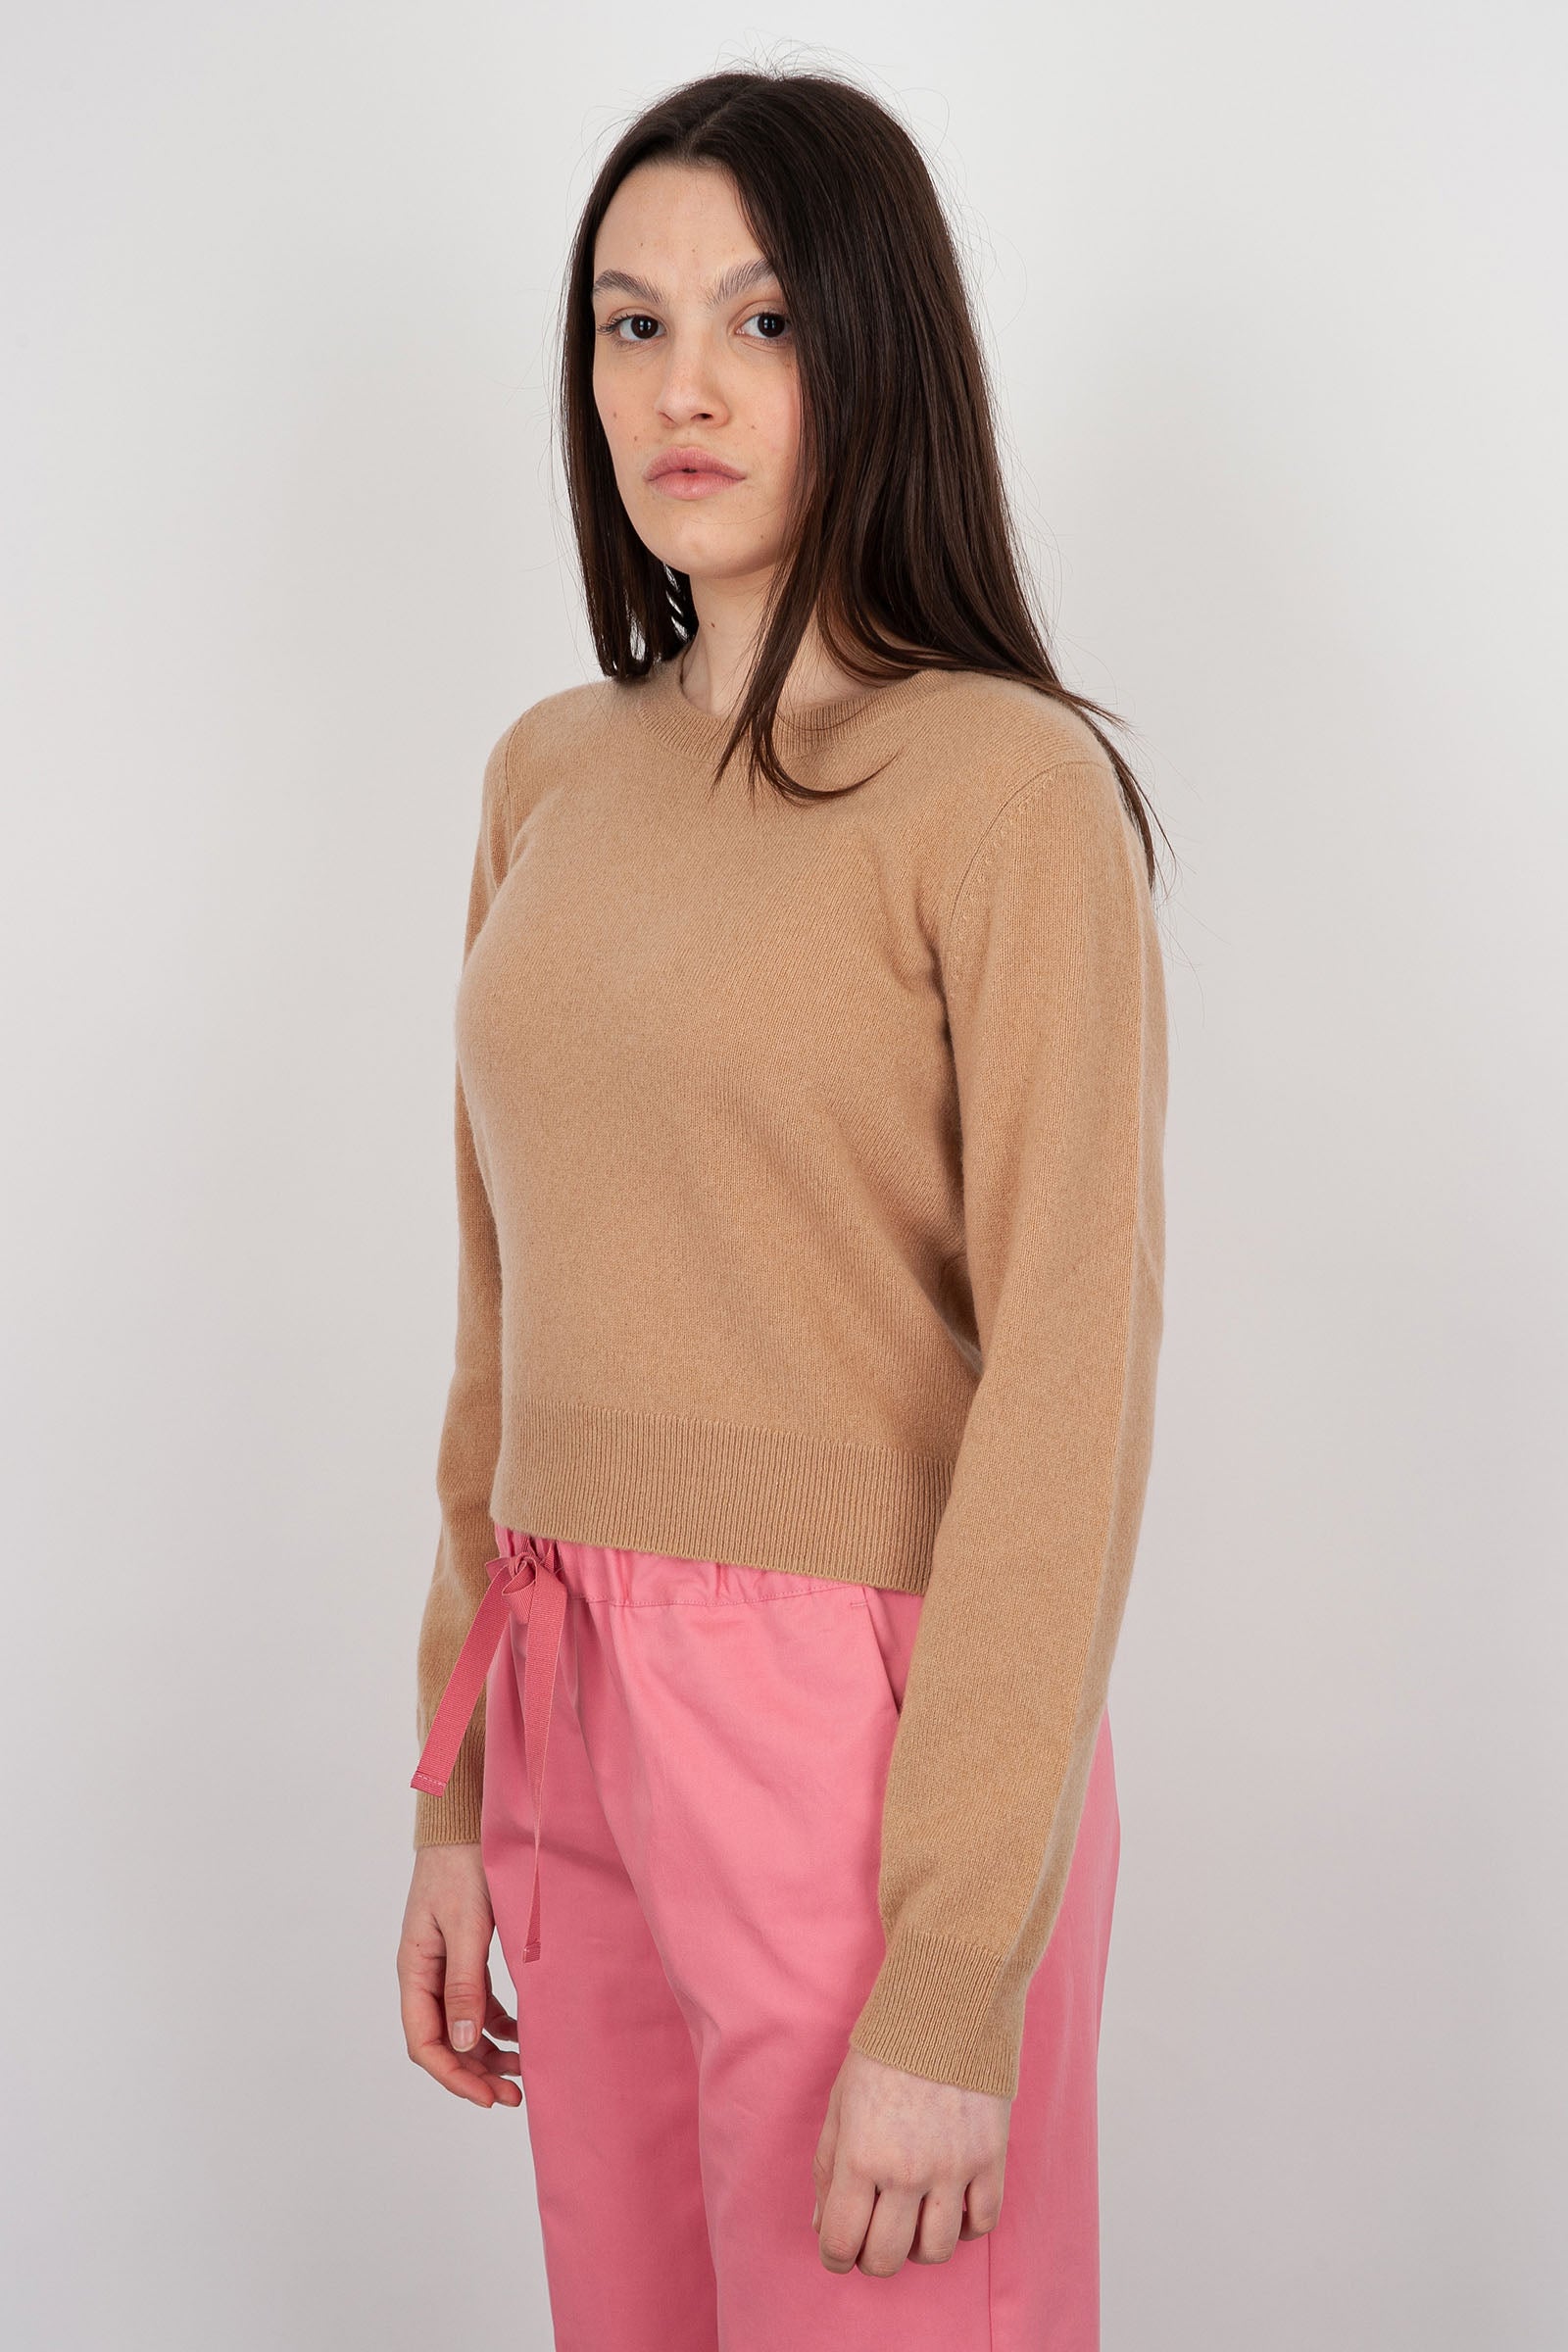 Absolut Cashmere Carlie Crew Neck Sweater in Sand Wool - 3